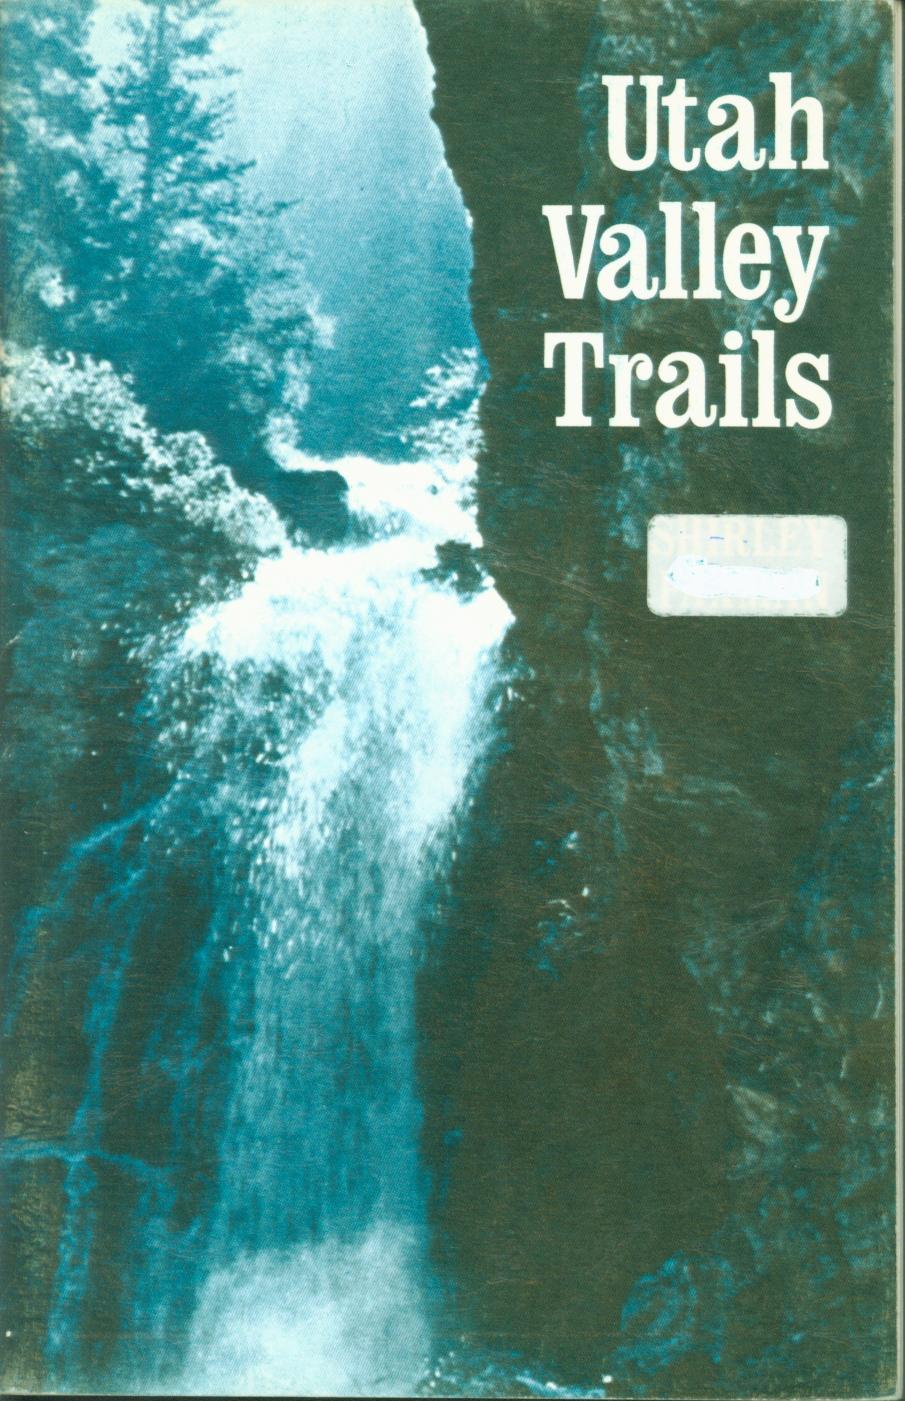 UTAH VALLEY TRAILS; a hiking guide to the many scenic trails around Provo, Utah.